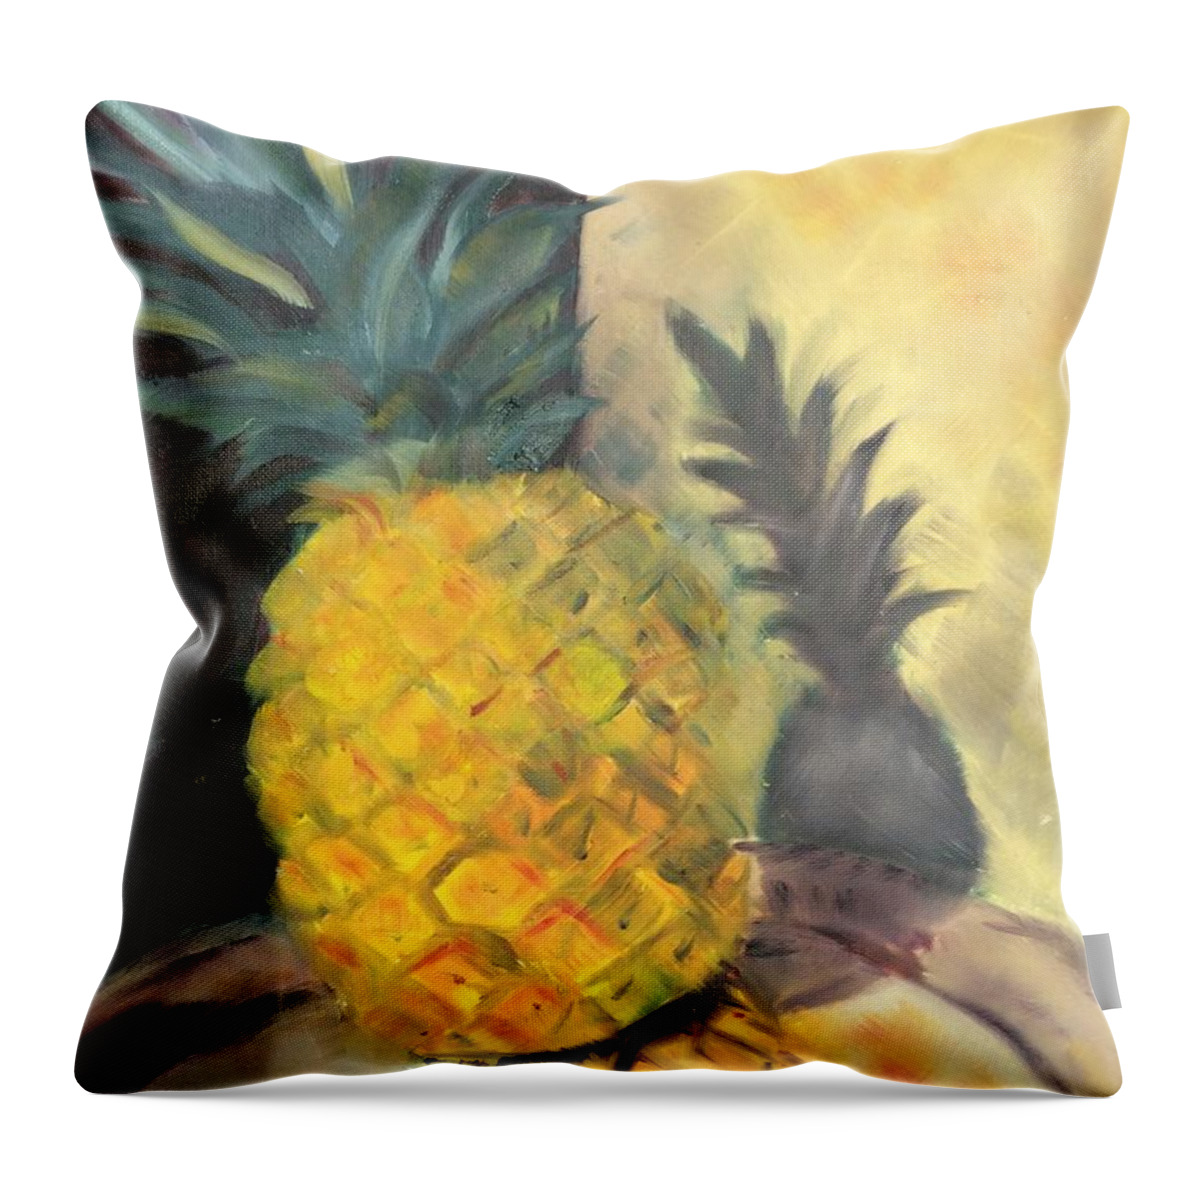 Impressionist Throw Pillow featuring the painting Pineapple on a Silver Tray by Karen Carmean